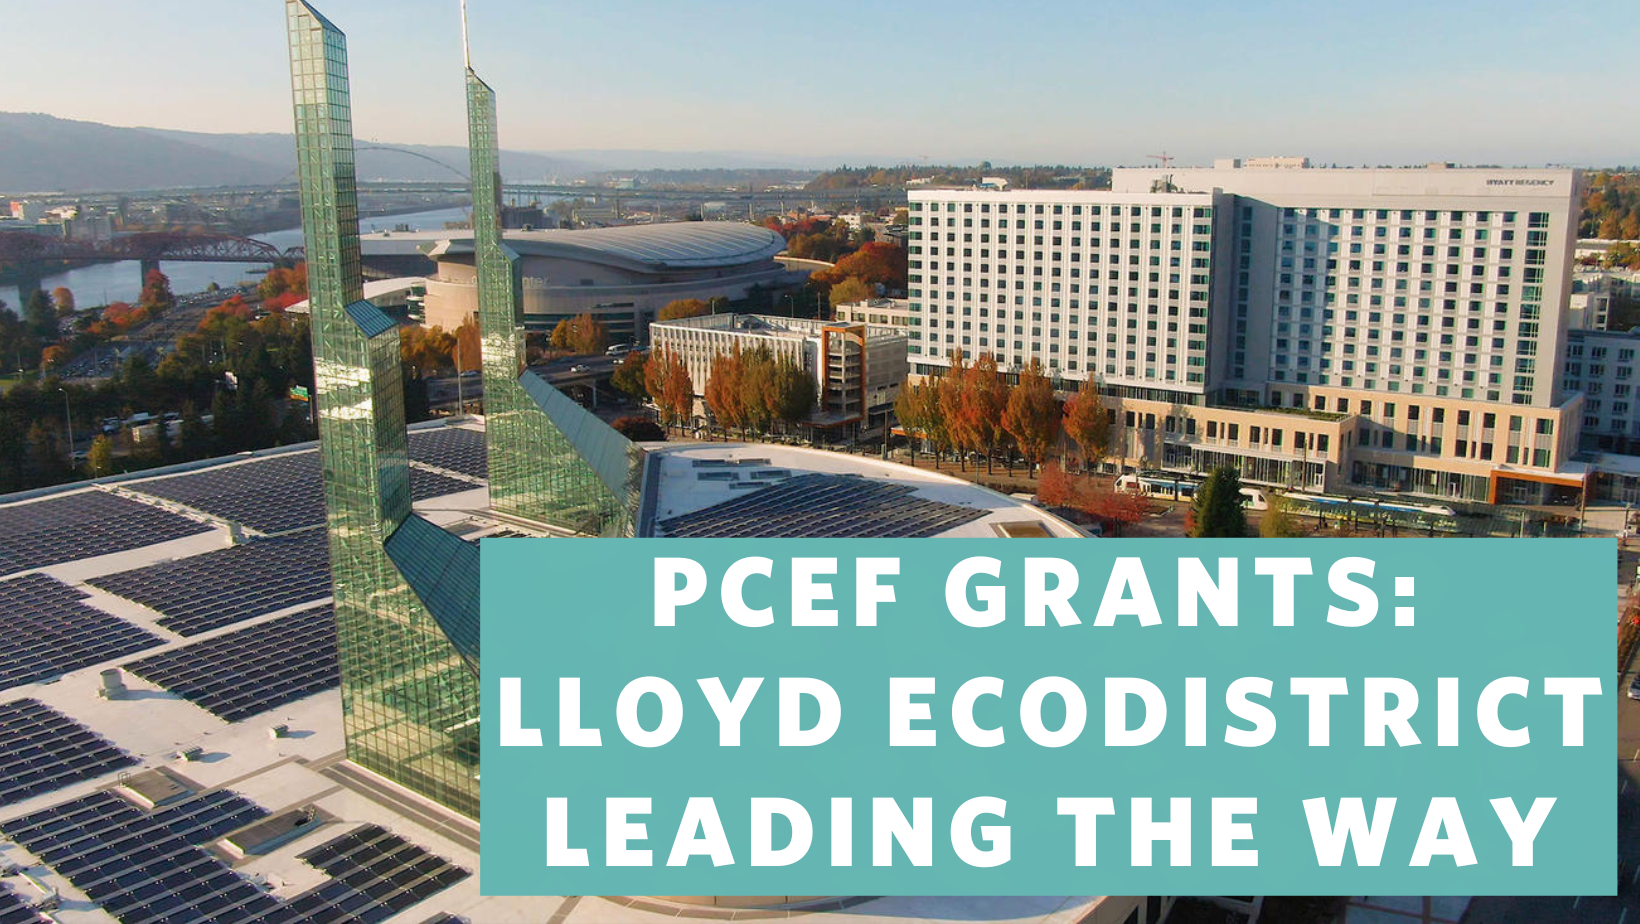 Photo of the Lloyd from overhead showing the solar panels at the Oregon Convention Center, with the words “PCEF Grants” Lloyd EcoDistrict Leading the Way”.